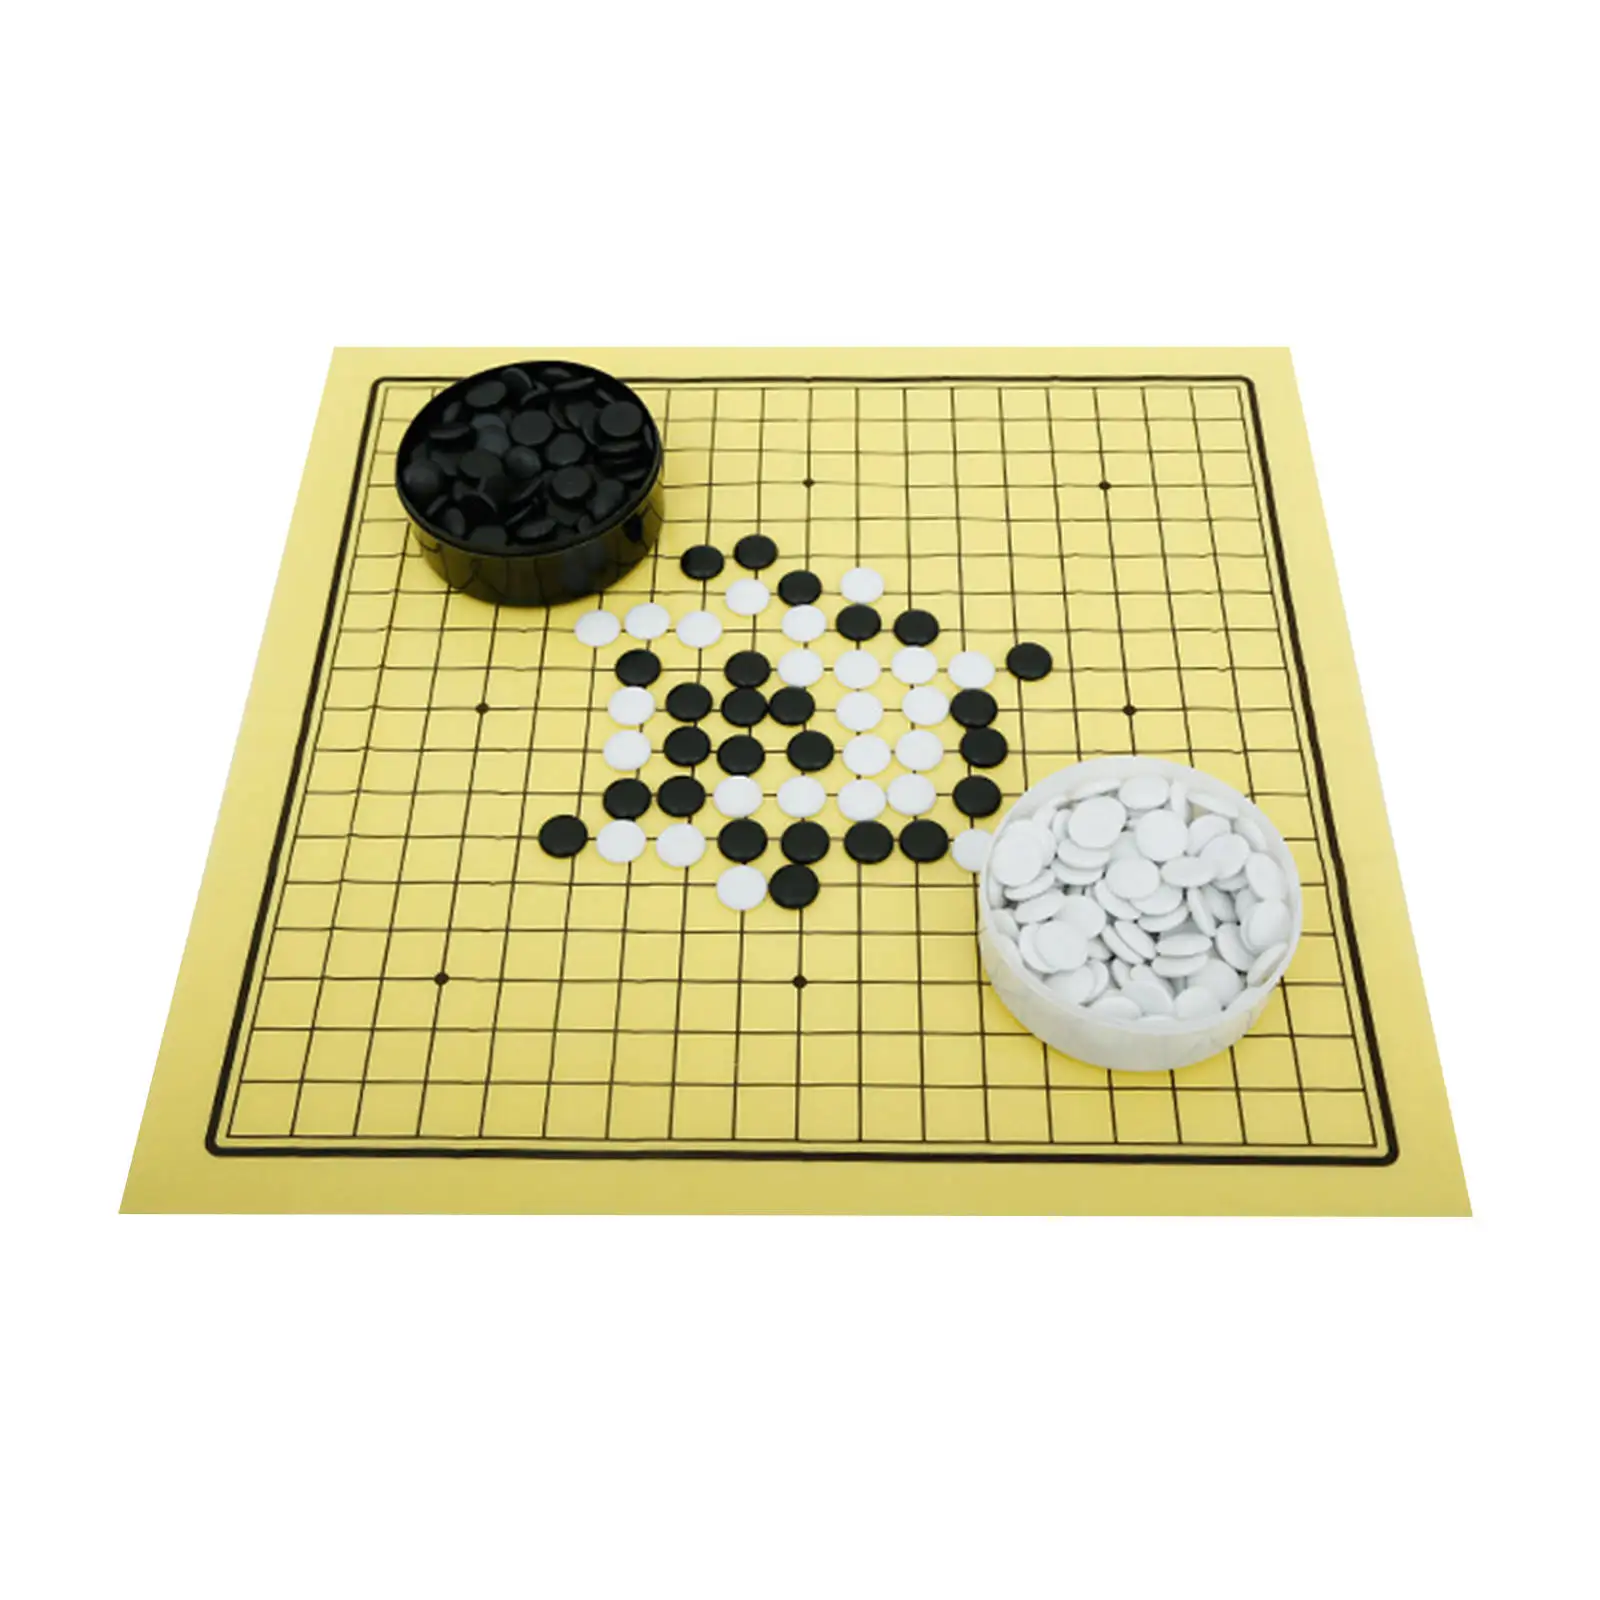 Folding Magnetic Travel Go Weiqi Baduk Game Set Board Pieces with Drawer MYUNGIN 